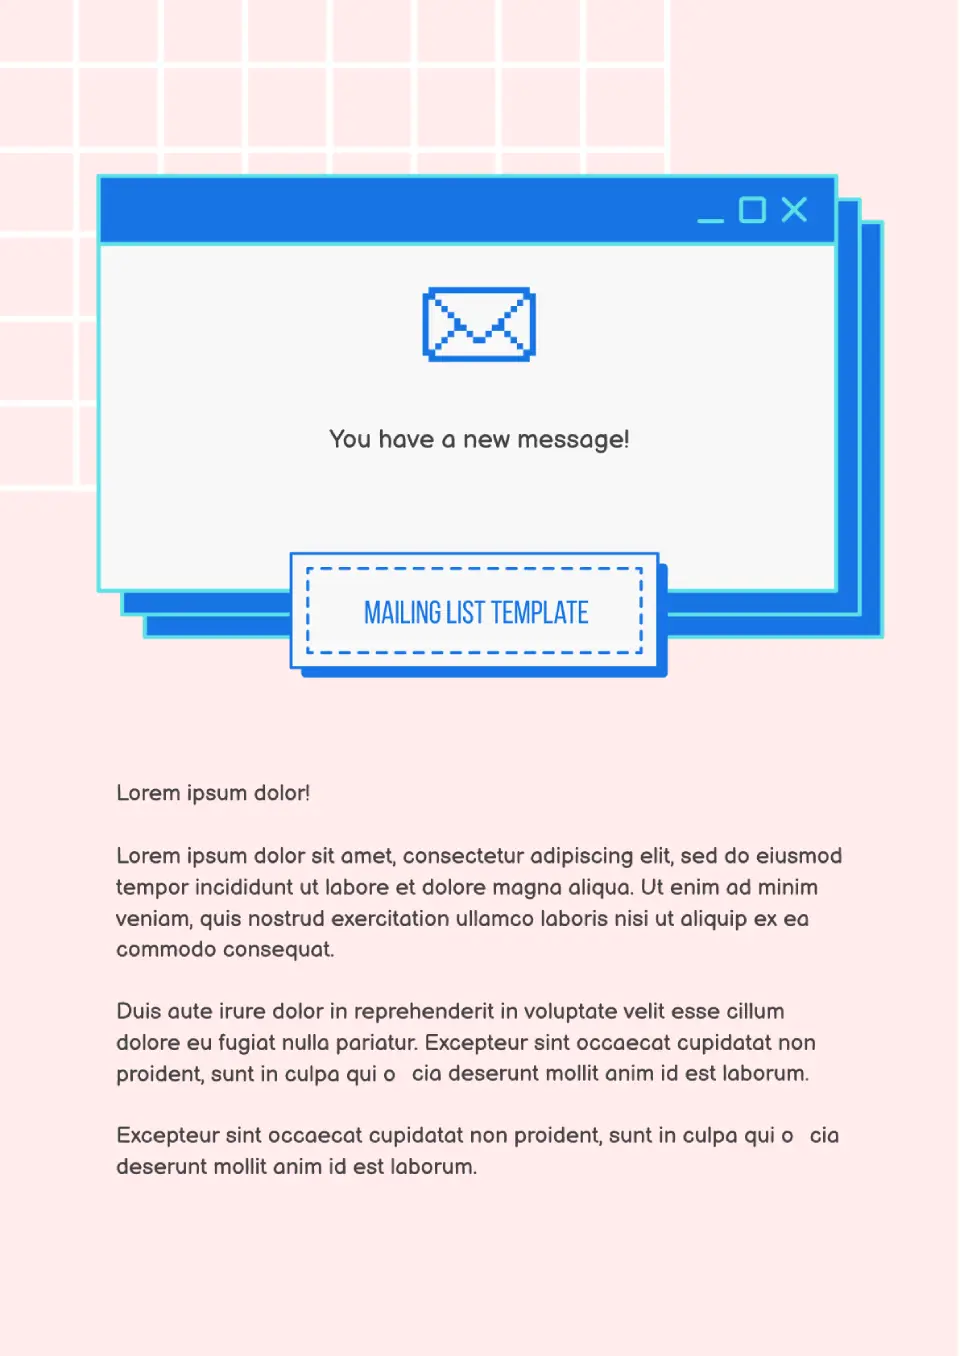 Mailing List Template